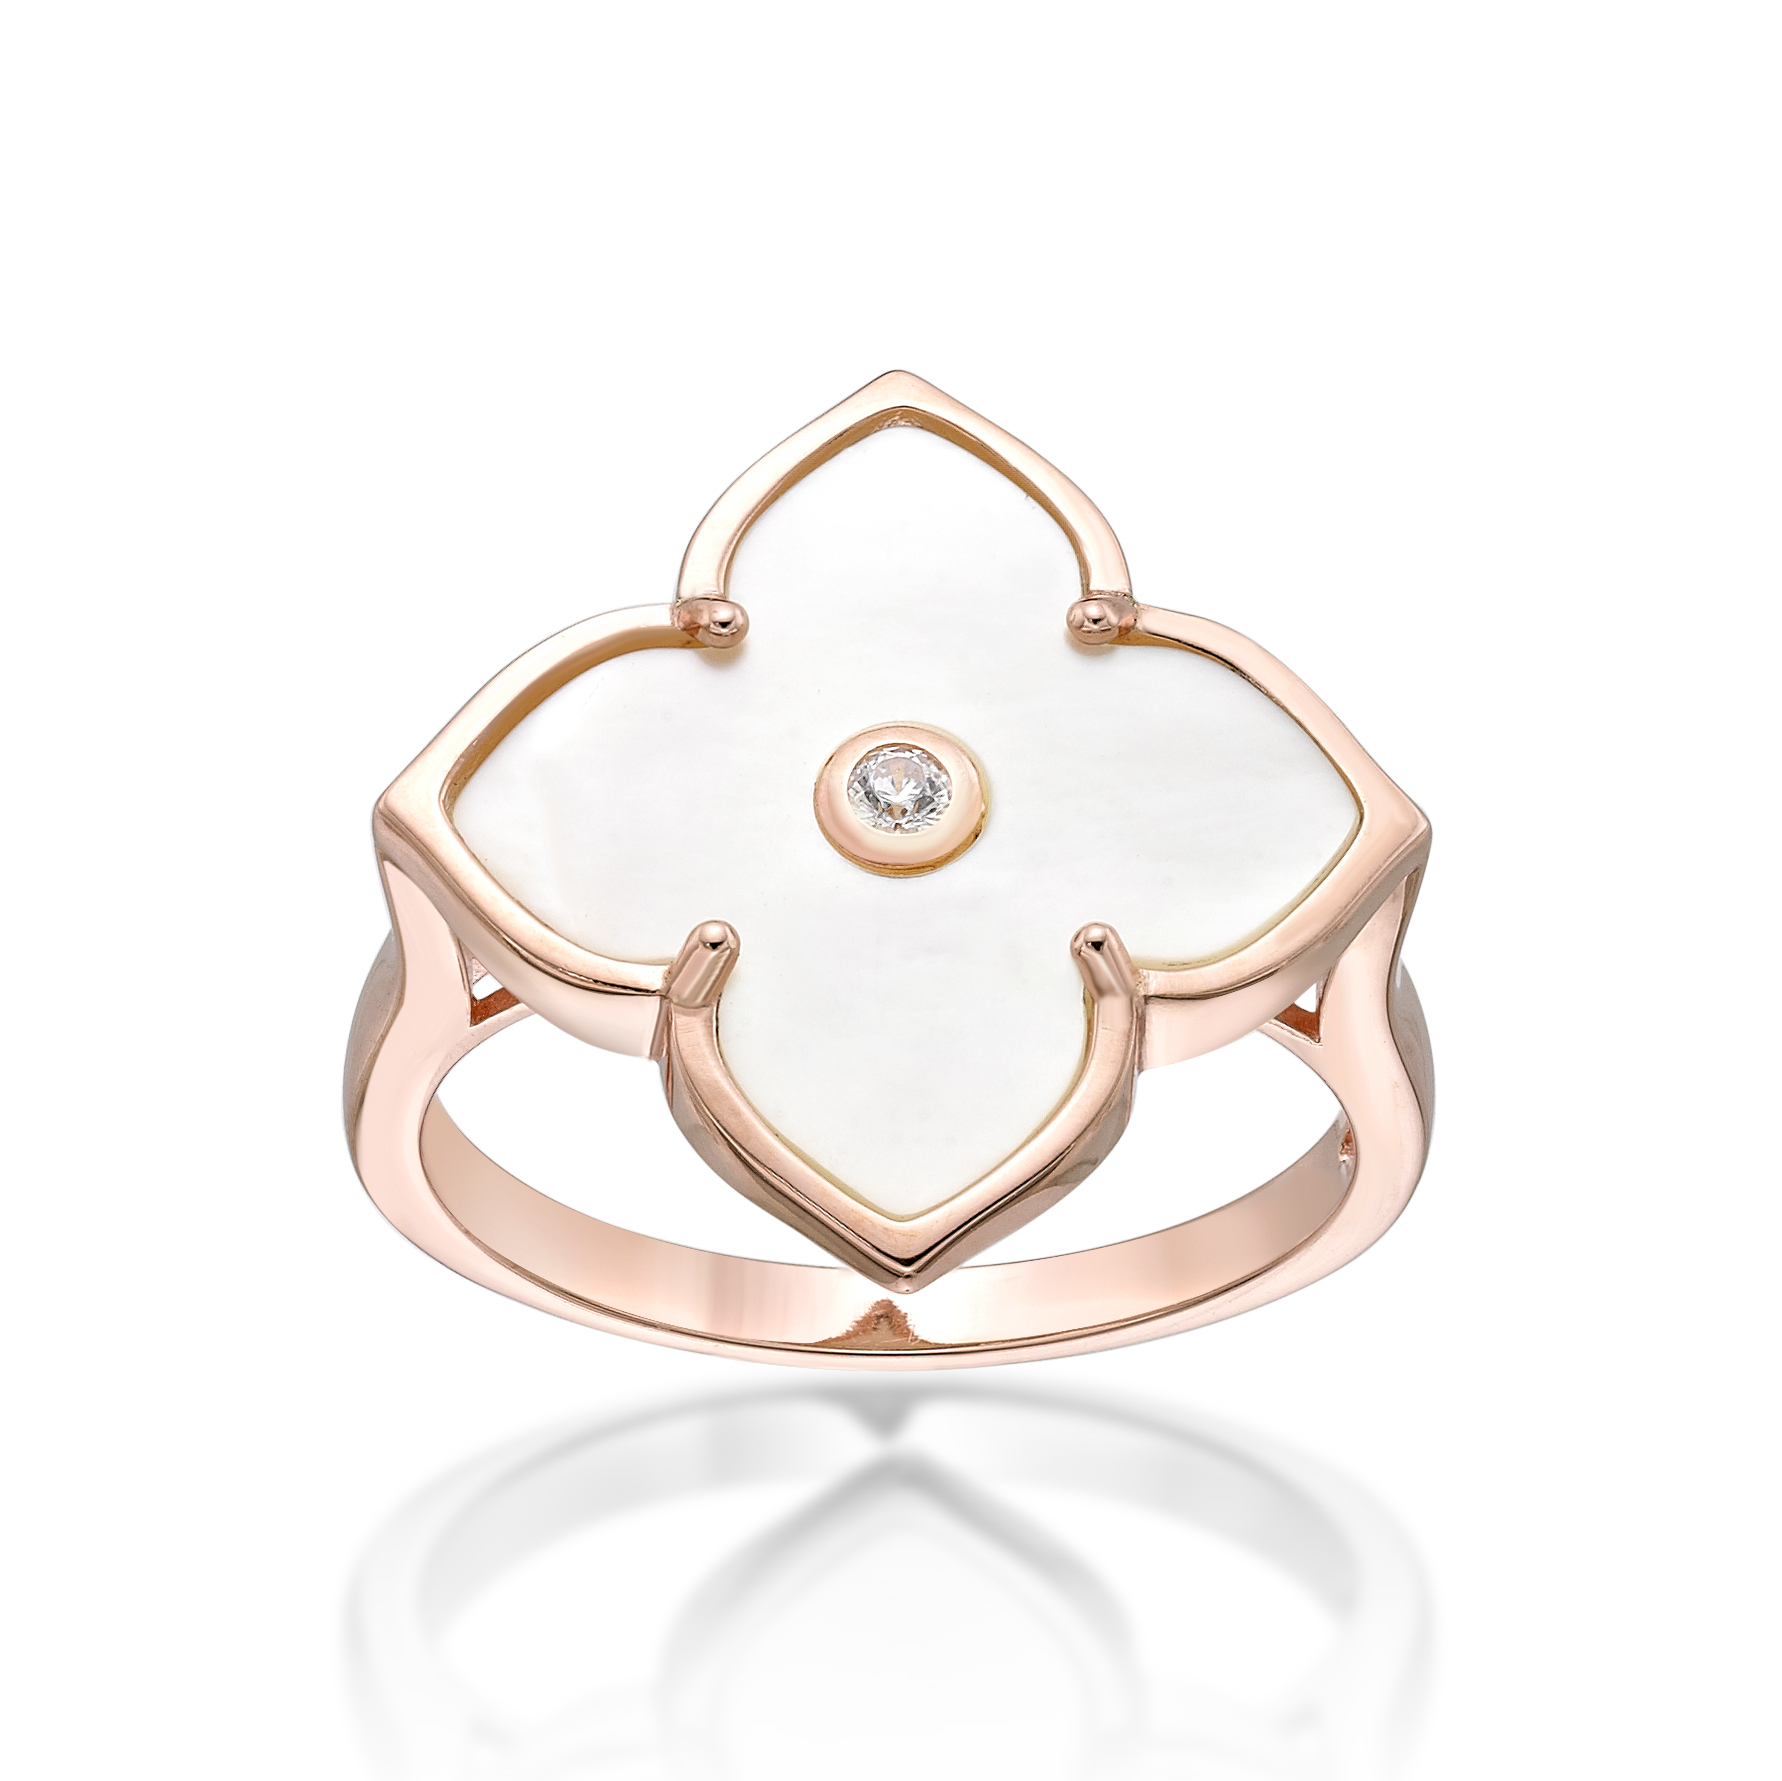 Lavari Jewelers Women's Mother of Pearl Flower Ring with Rose Gold Plating, 925 Sterling Silver, Cubic Zirconia